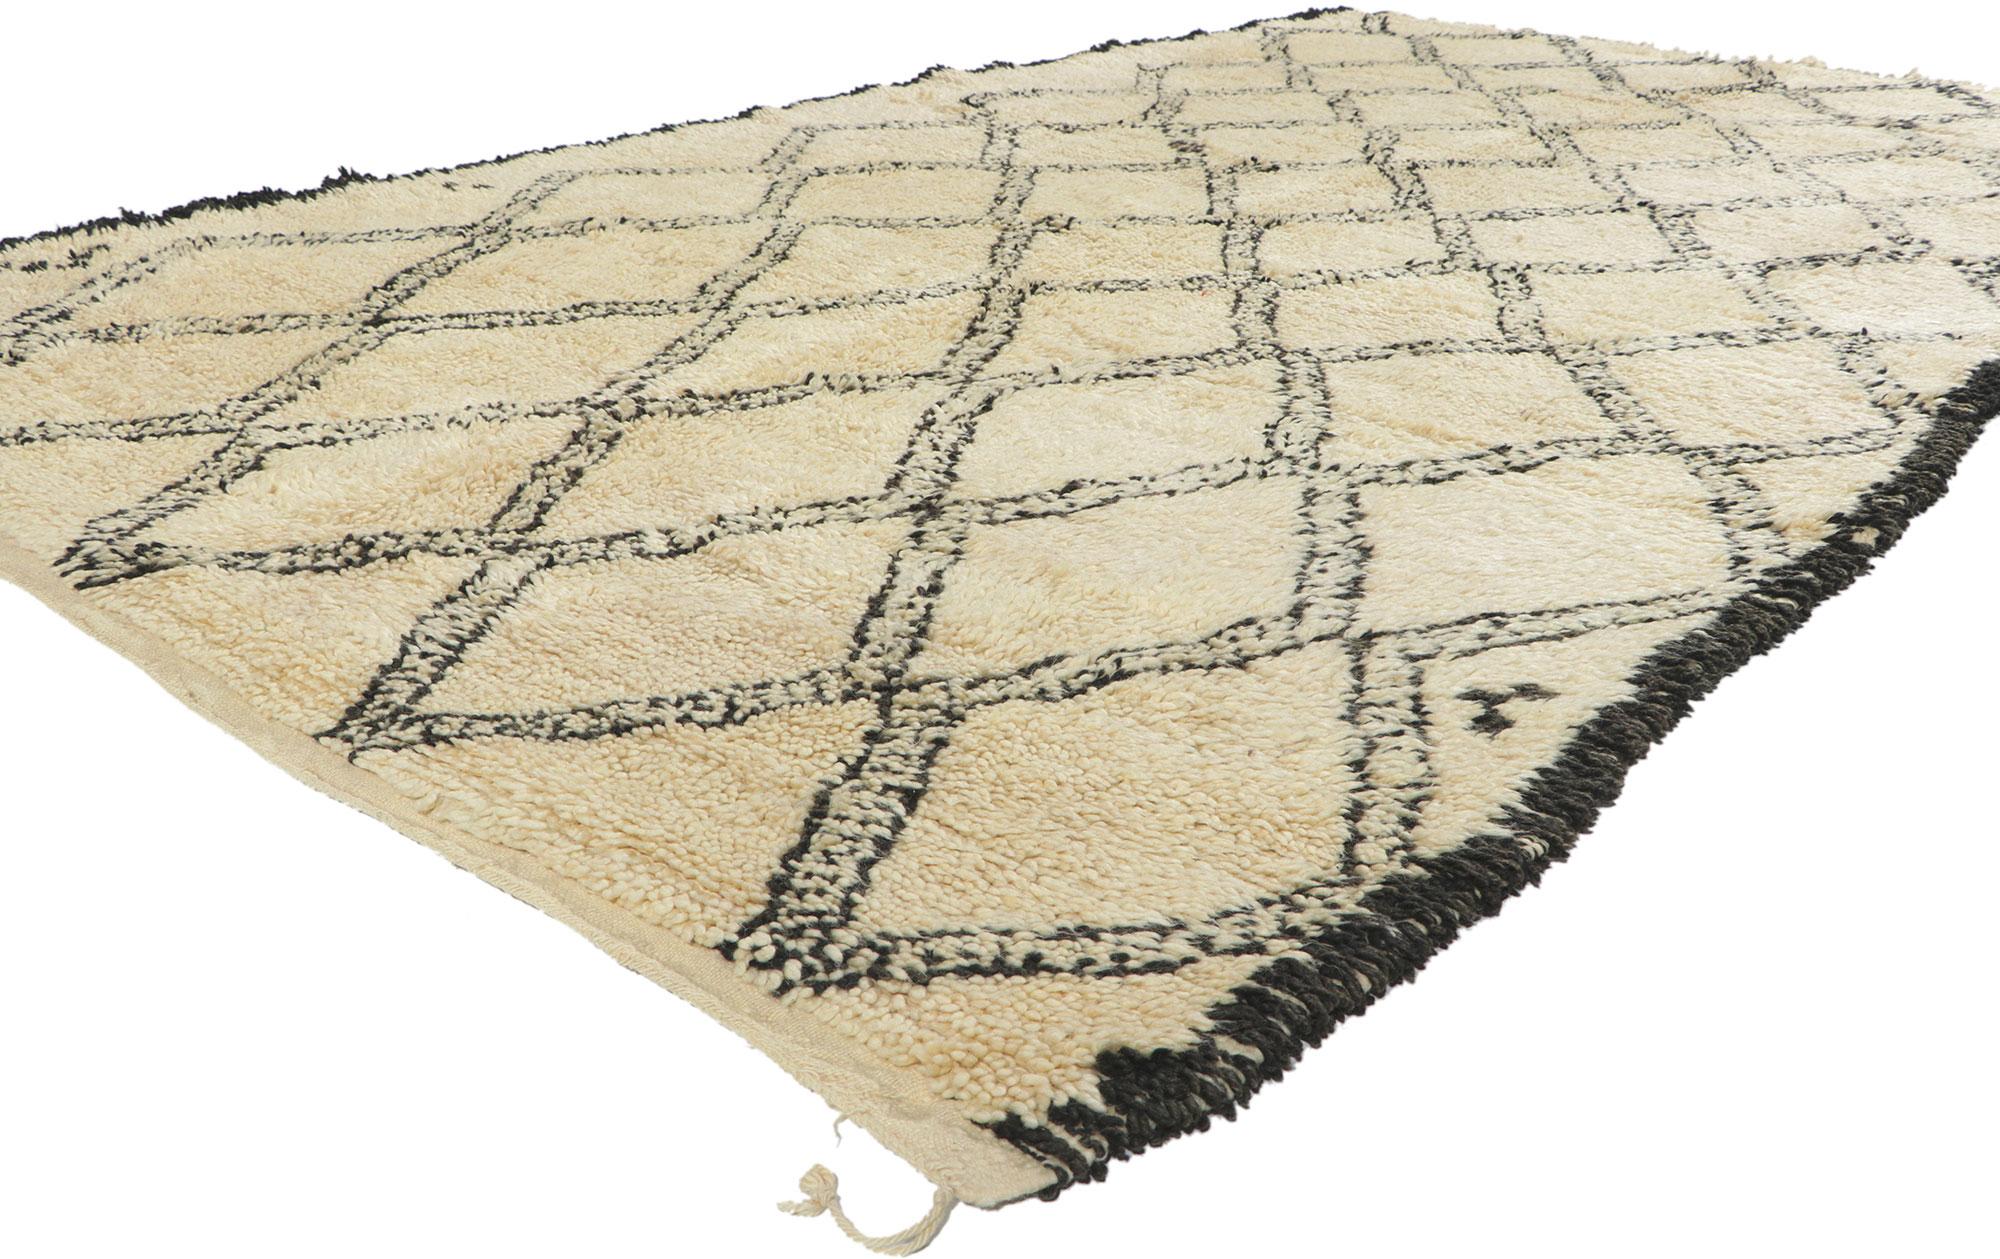 78376 Vintage Moroccan Beni Ourain Rug, 06'01 x 11'02. With its Midcentury Modern style, incredible detail and texture, this hand knotted wool vintage Beni Ourain Moroccan rug is a captivating vision of woven beauty. The eye-catching diamond trellis